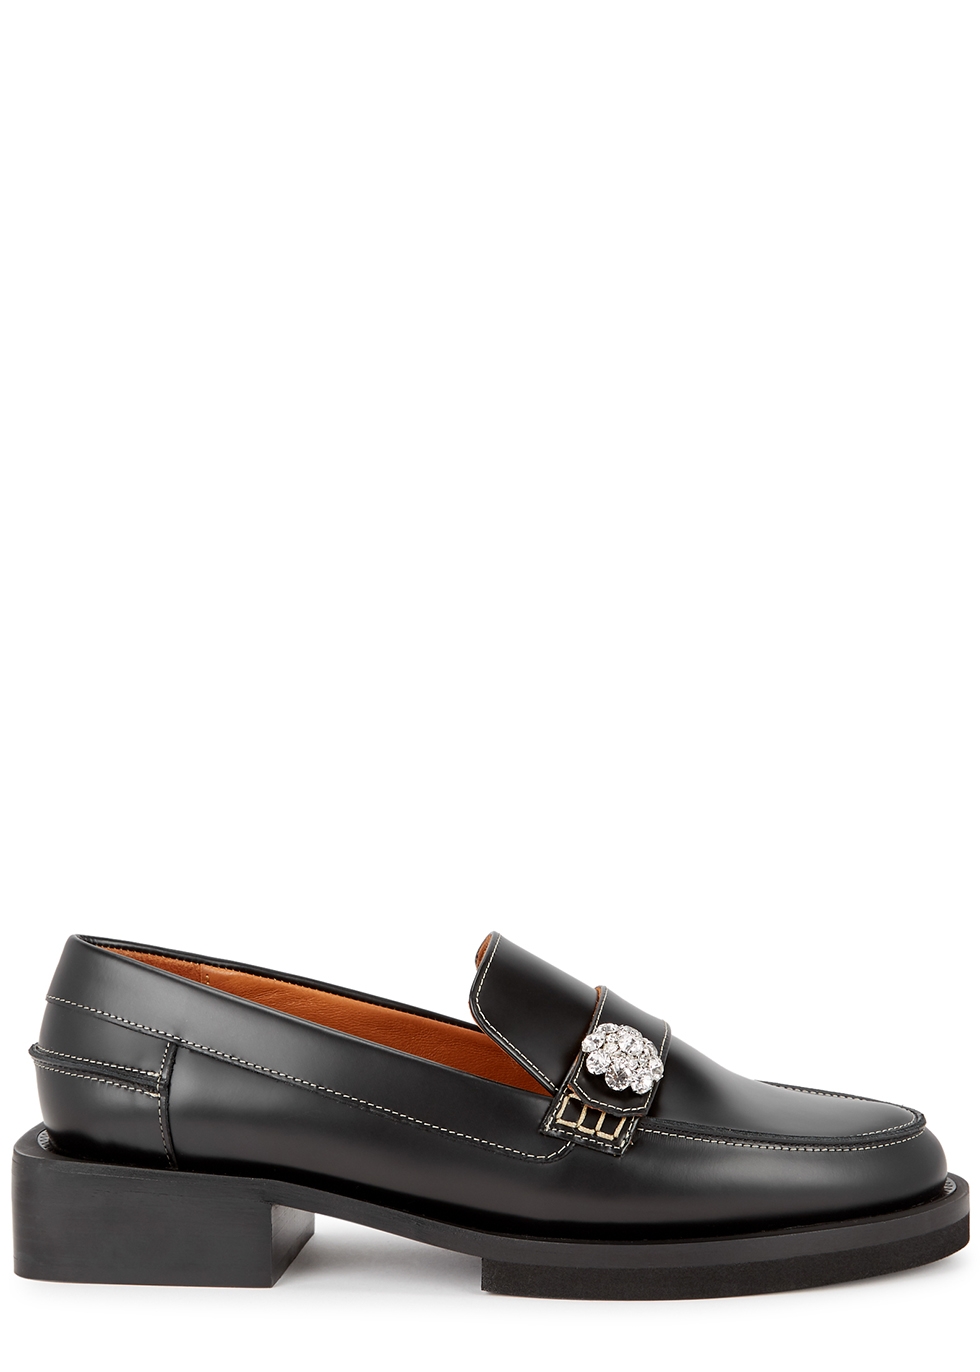 40 black leather loafers